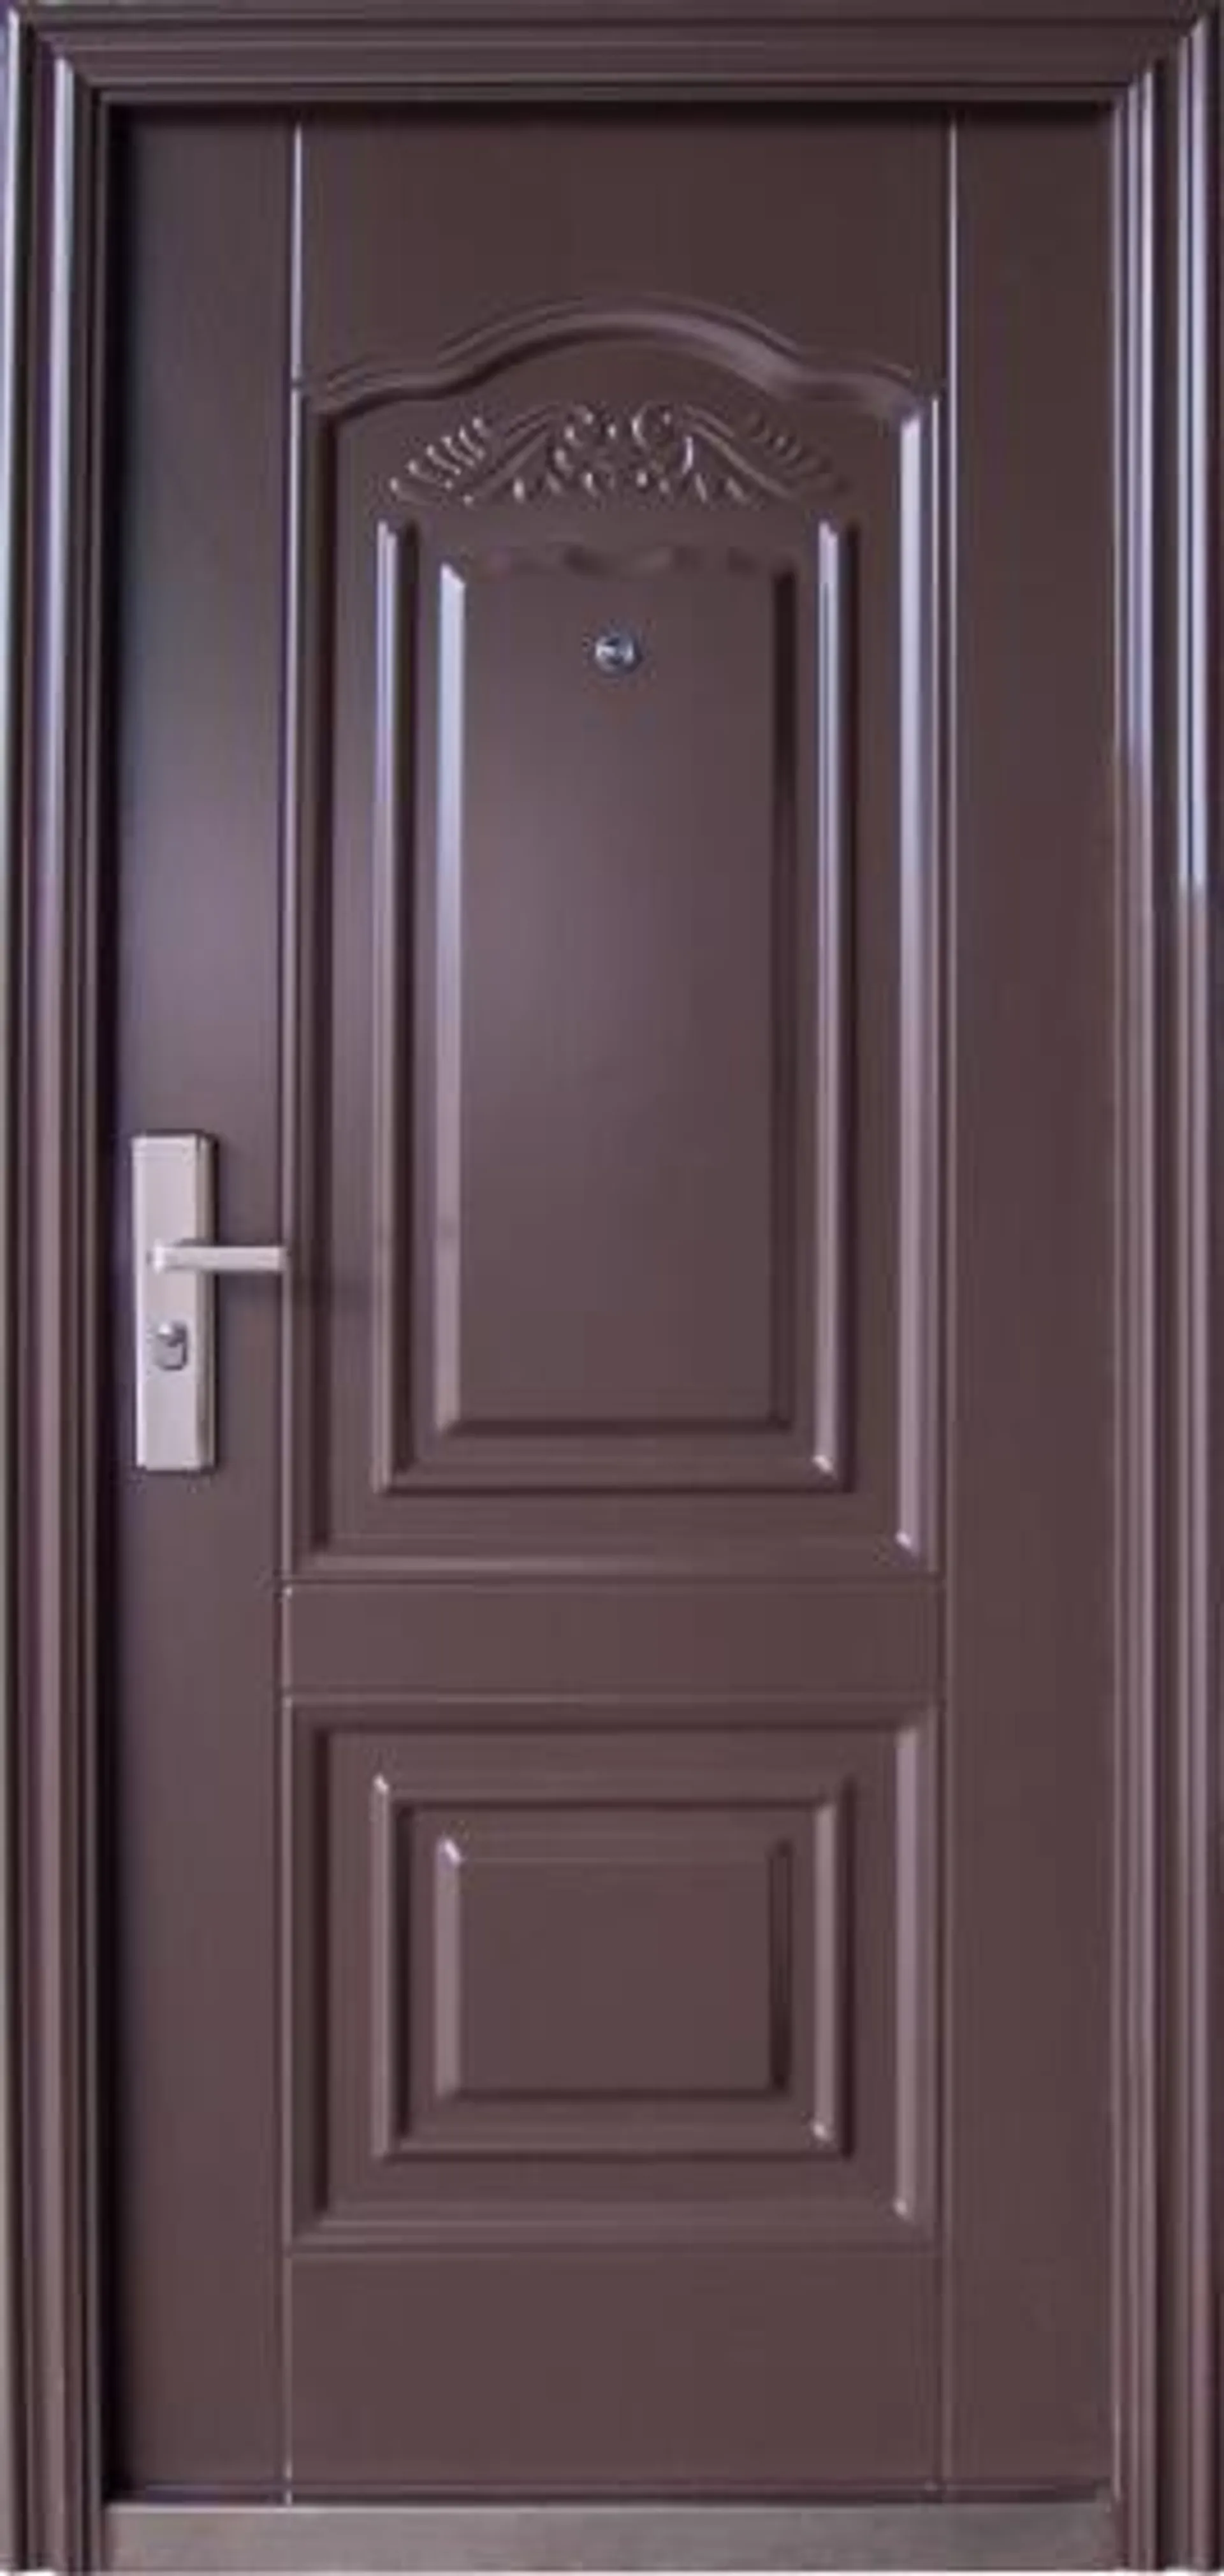 Entry Door High Security Steel with Frame (prehung) 2 Panel Powder Coated Brown Left Hand Opening Open-in-w860xh2050mm